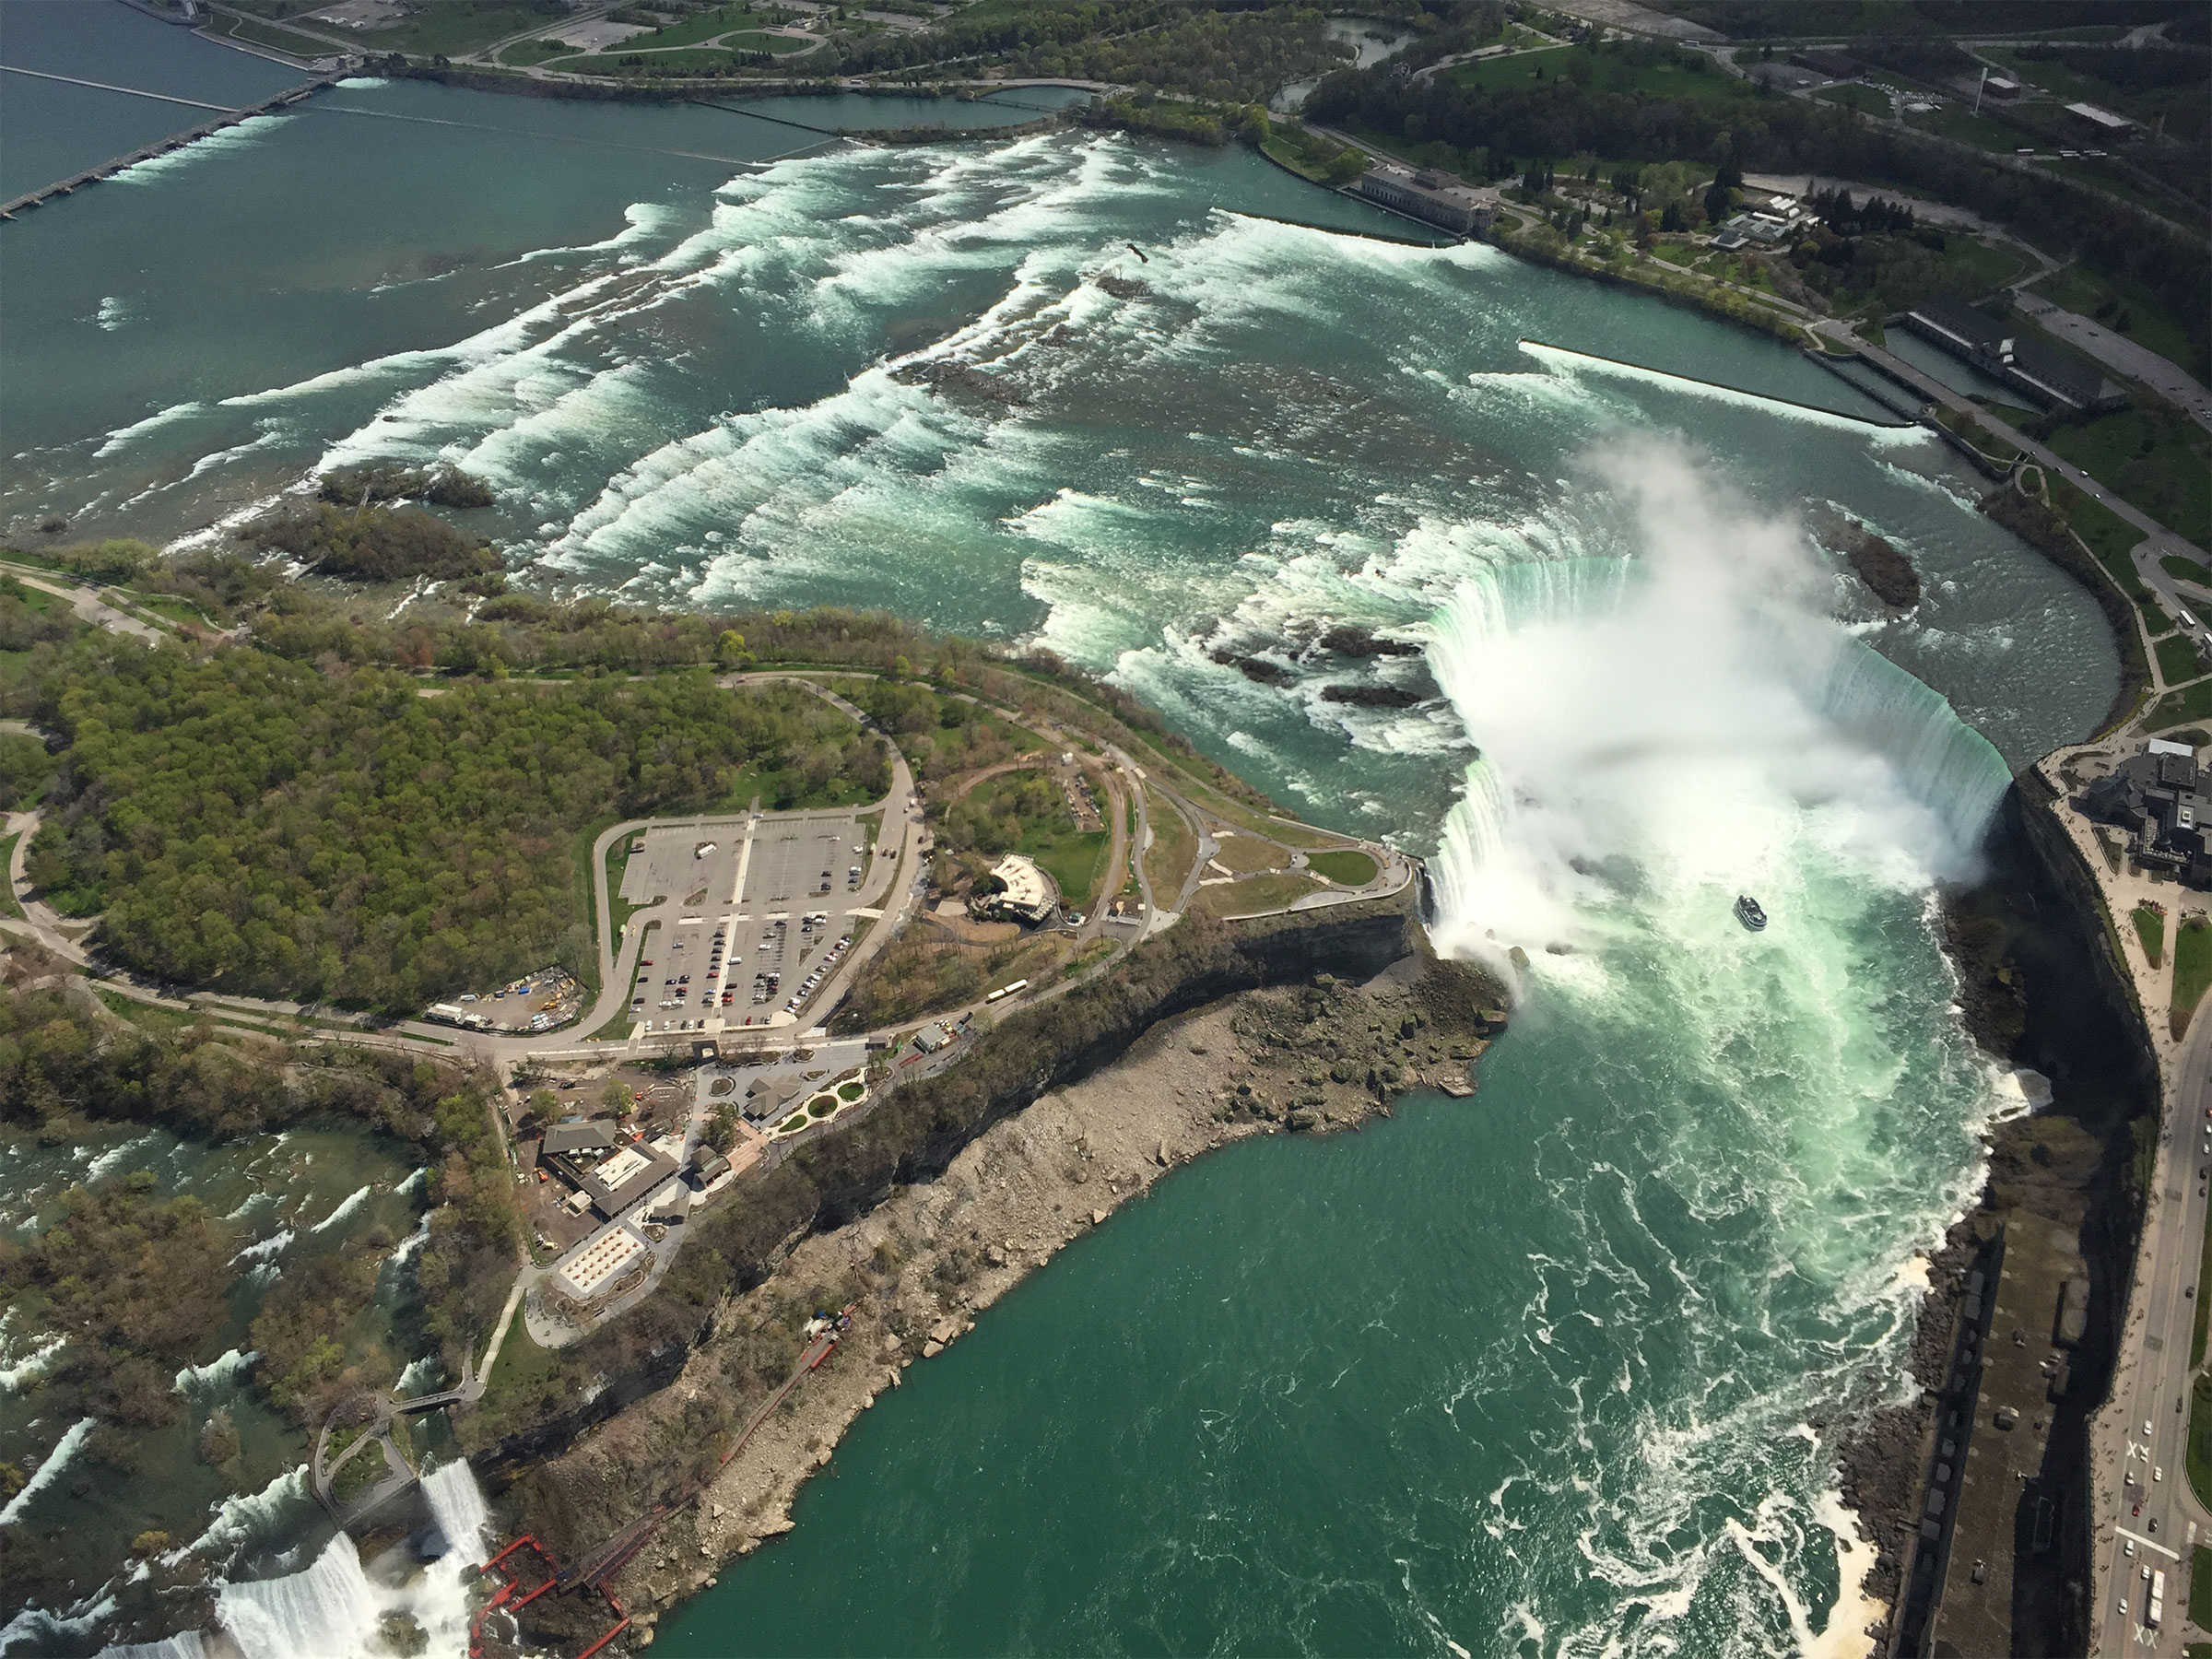 NIAGARA, CANADA: Wine, Waterfall ... and then Porn - The Radio Vagabond  Travel Podcast I took a drive down to the the Niagara Falls in Canada